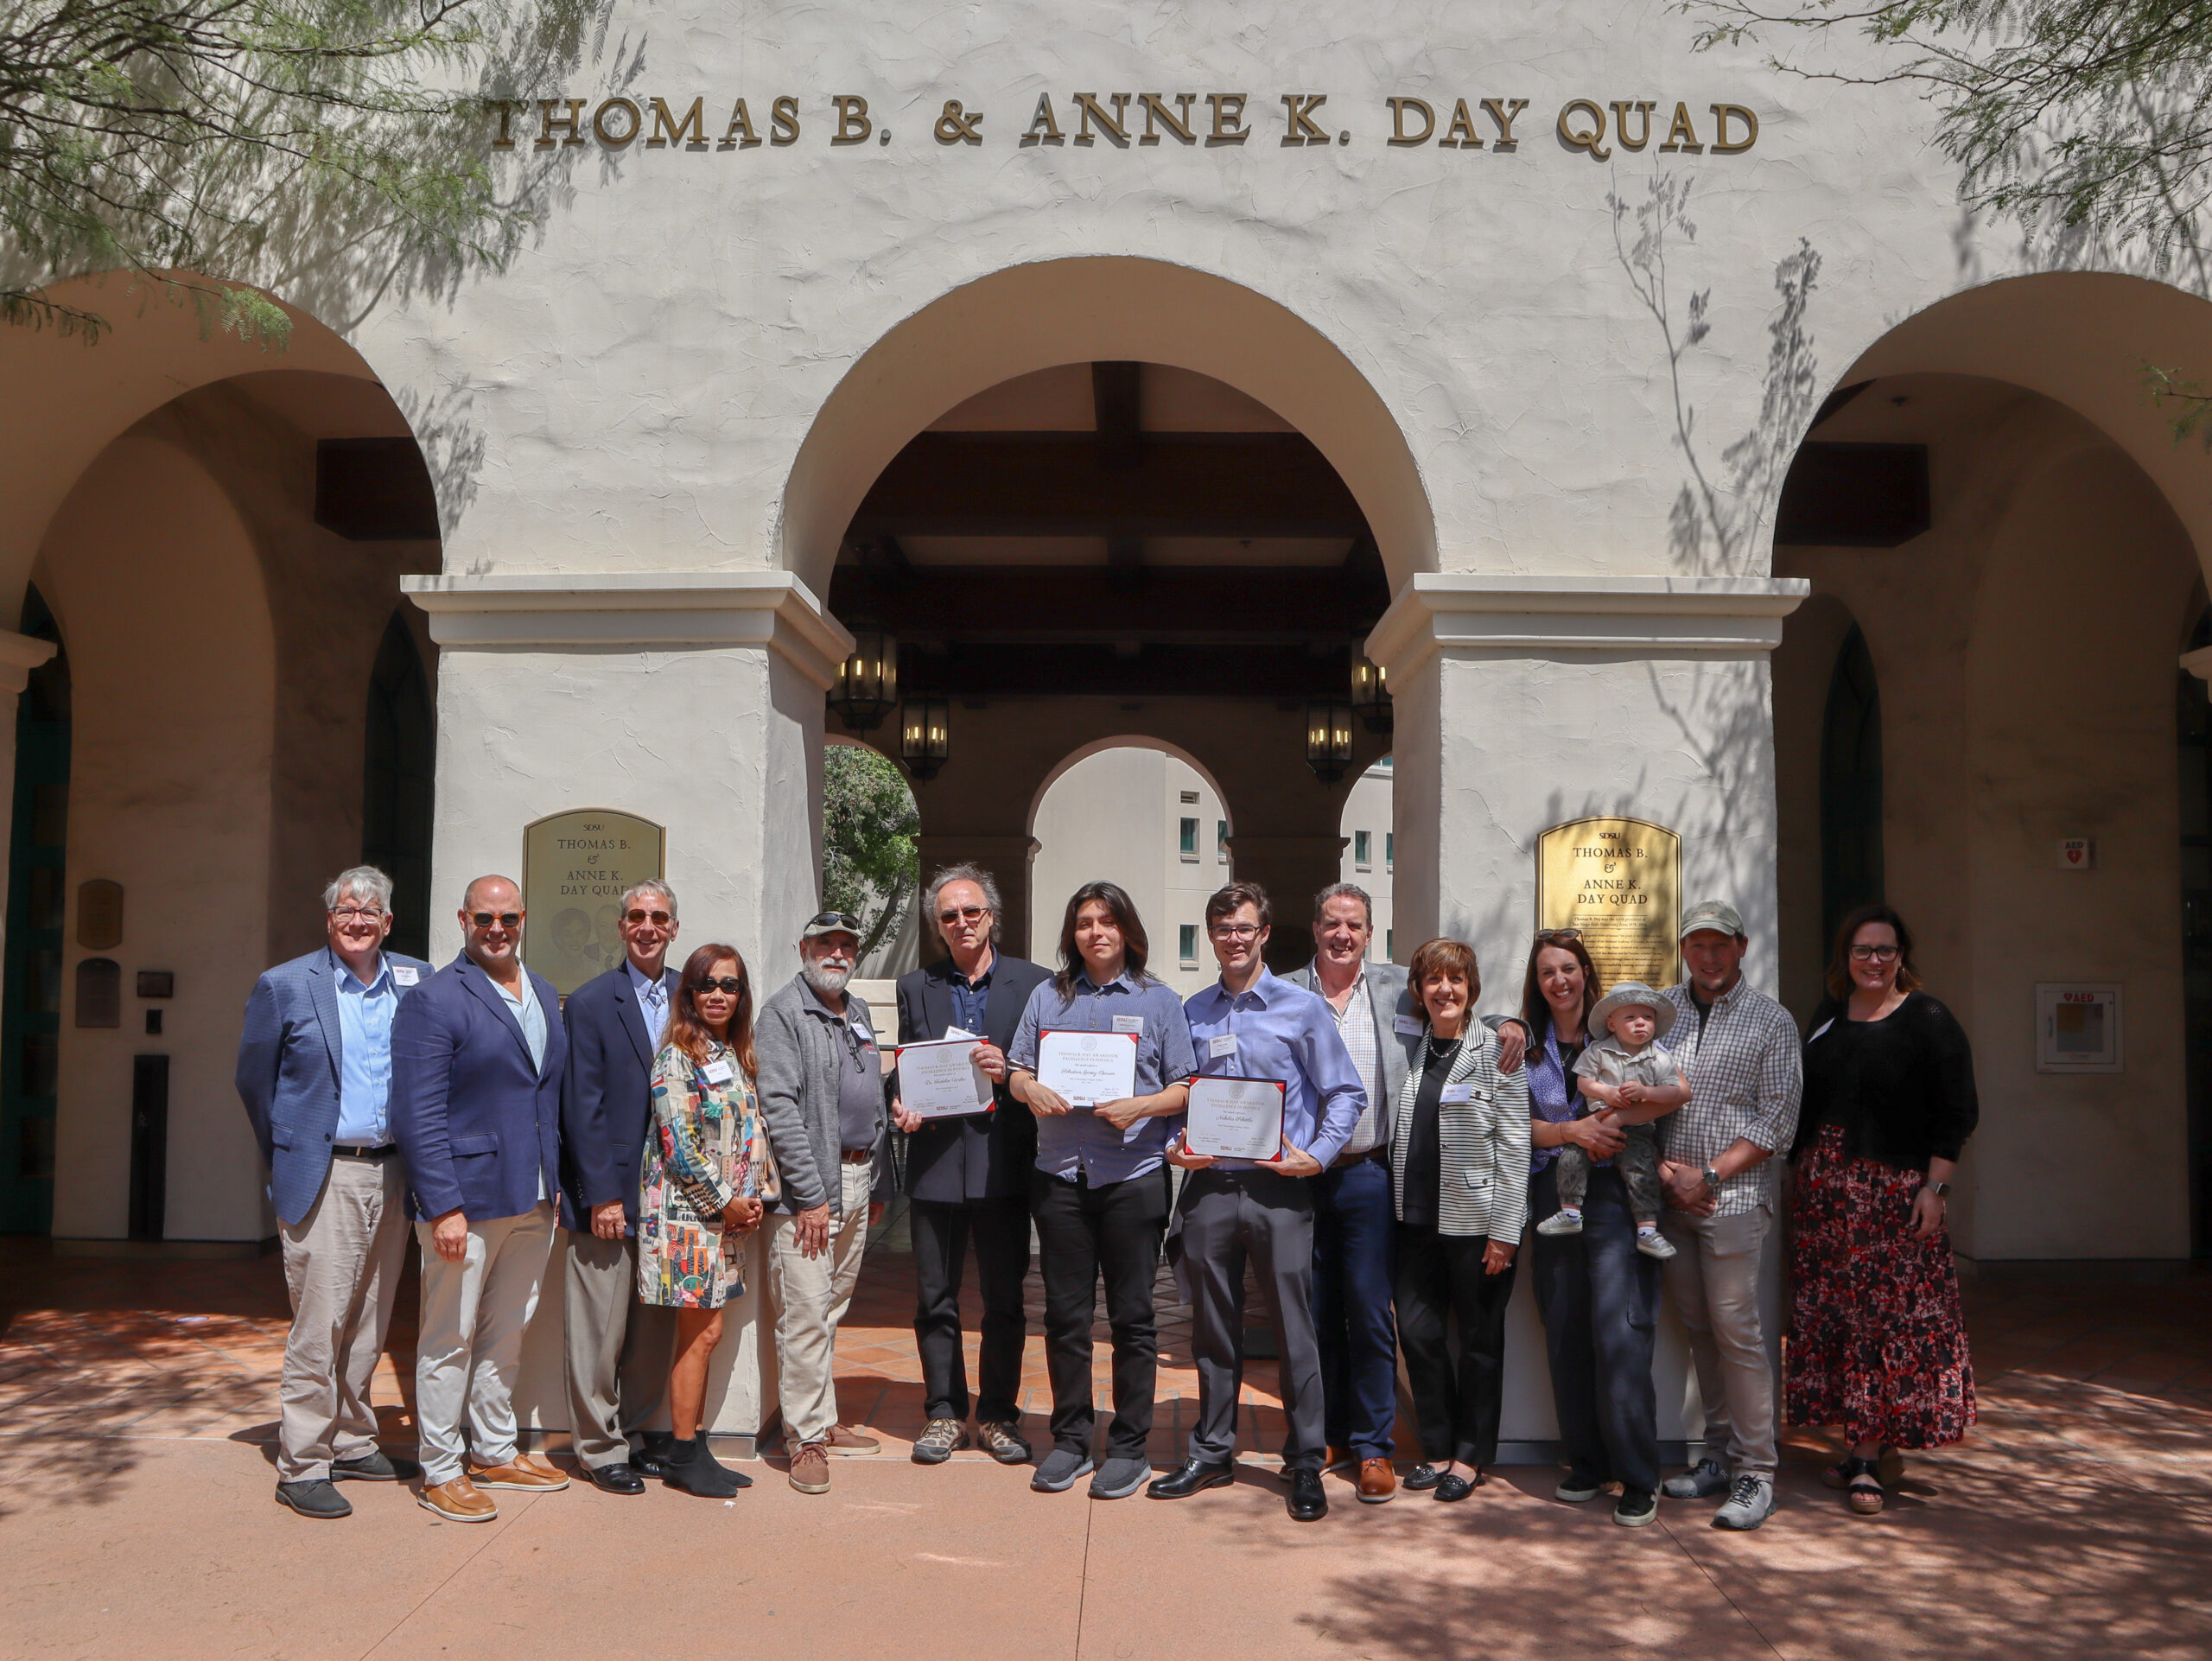 (From left to right) Dean Jeffrey Roberts, Adam Day, Brad Pitzer, Toy Pitzer, Sam Crivello, Professor Fridolin Weber, Sebastian Gomez-Barron, Nicholas Schottle, Tim Day, Krista Day, Meghan Day, Andrew Bollman and Vice Provost Sonjia Pruitt-Lord in Thomas B. & Anne K. Day Quad